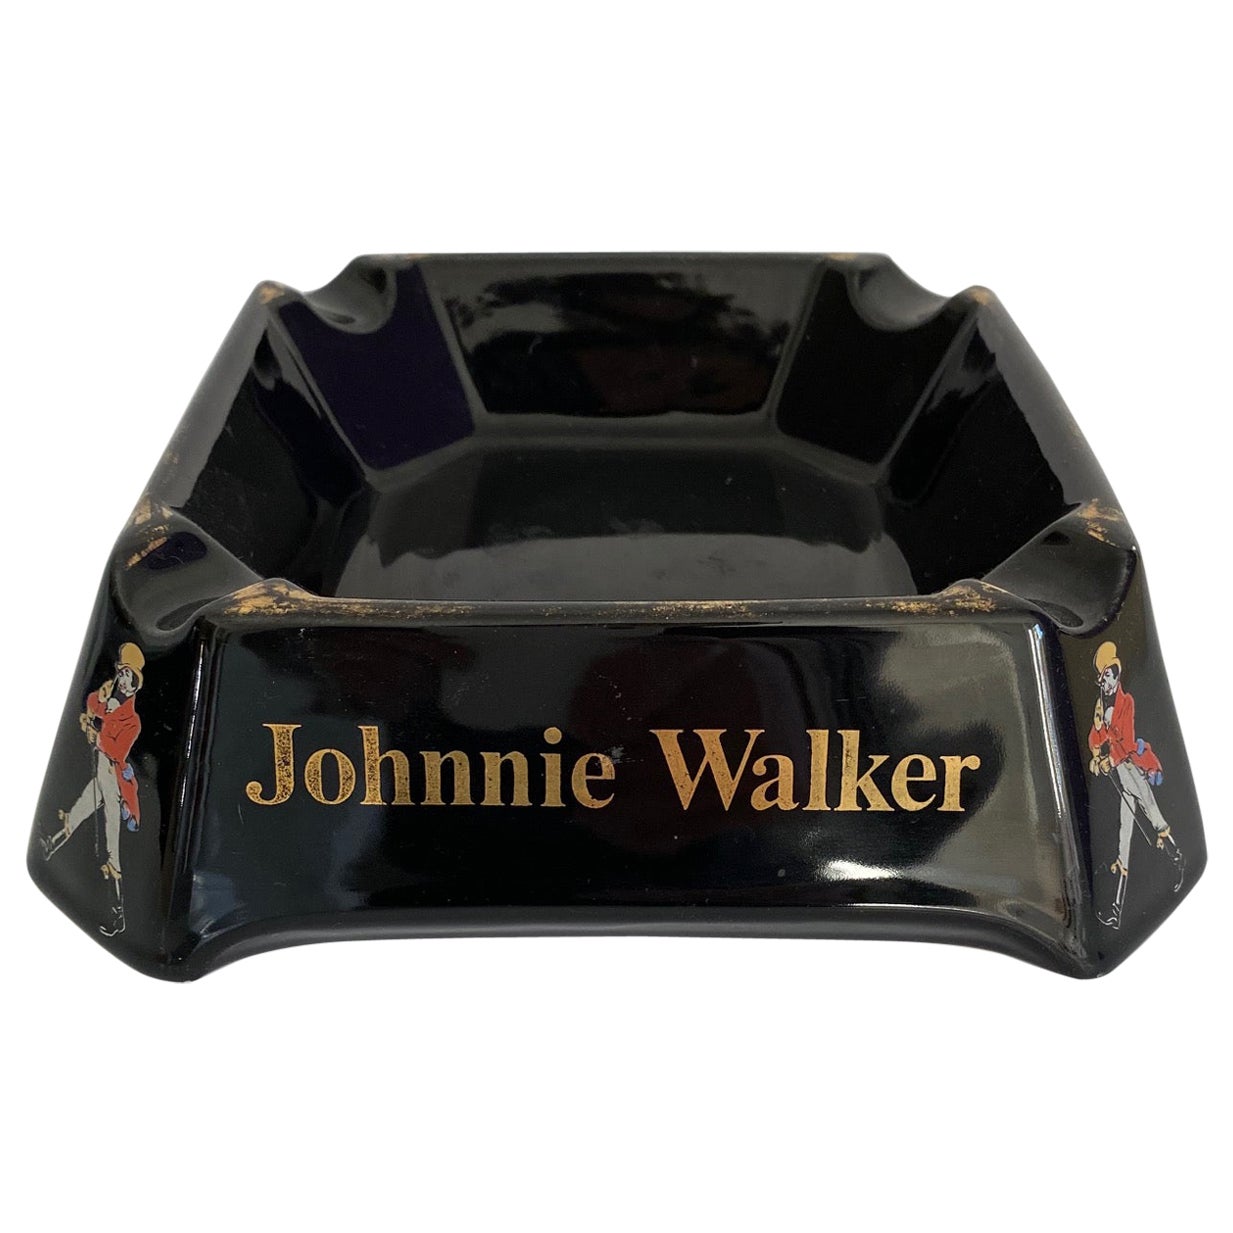 Johnnie Walker Ashtray For Sale